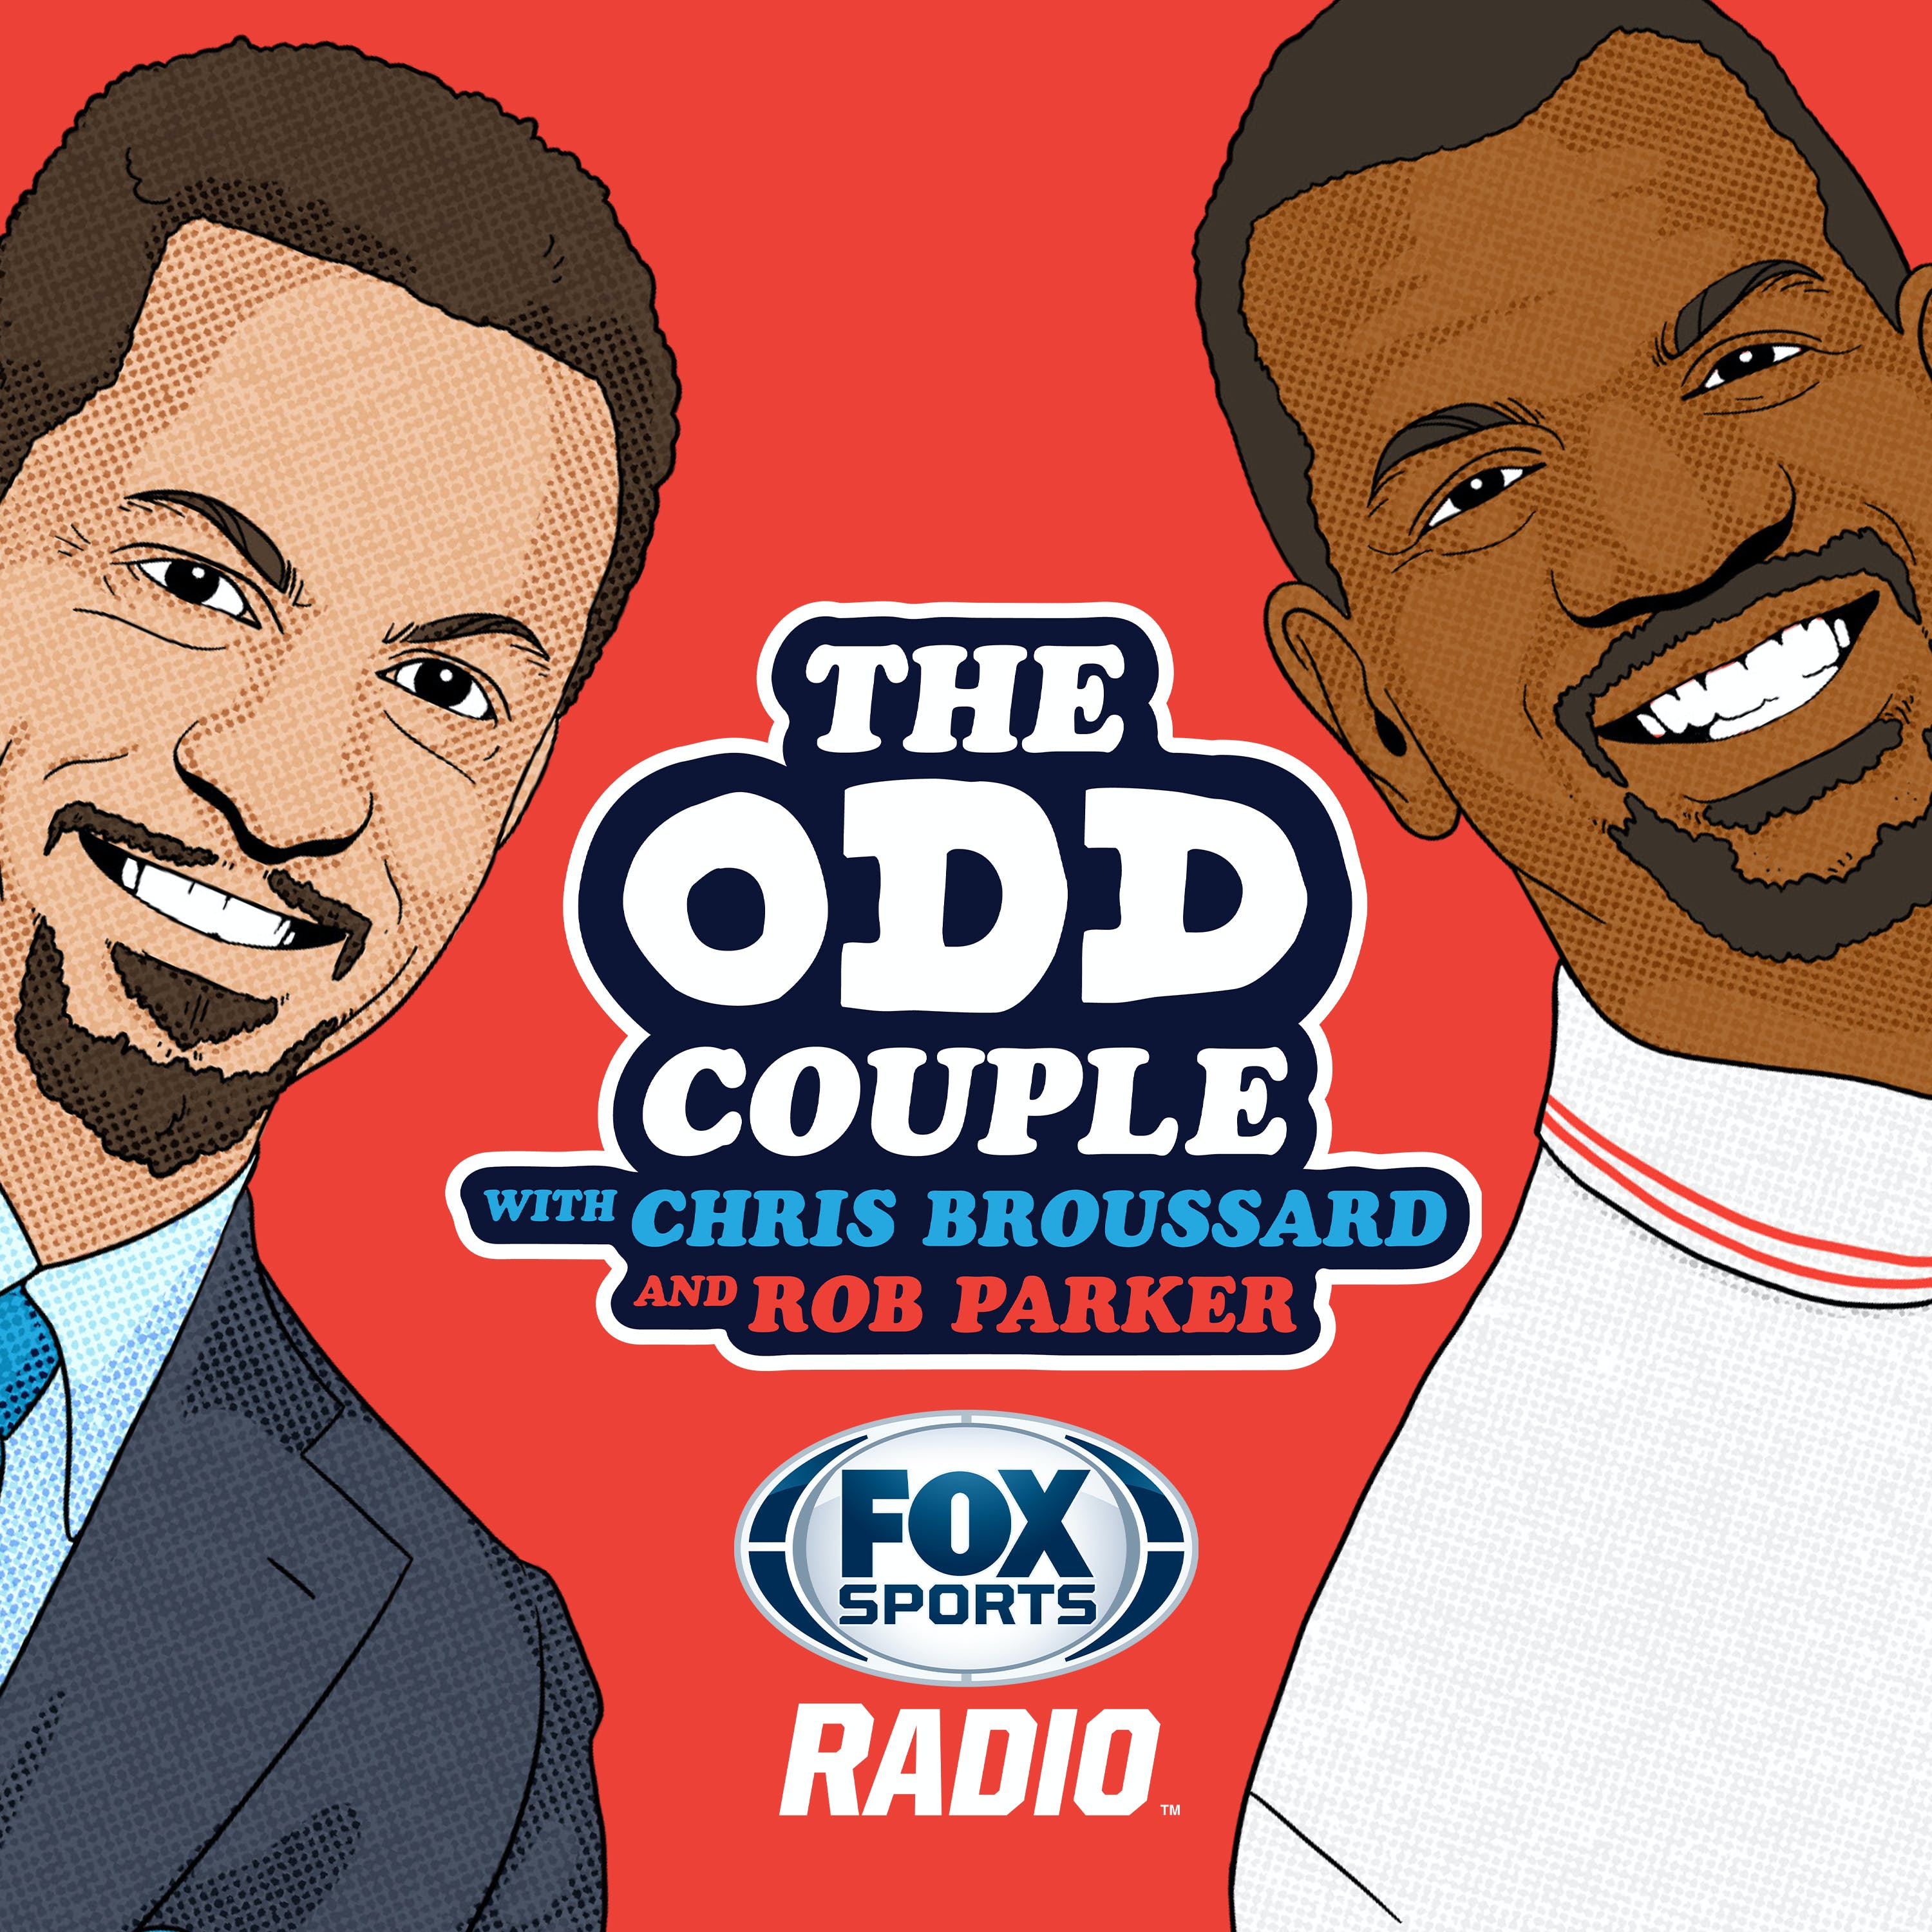 11/17/2020 - Best of The Odd Couple